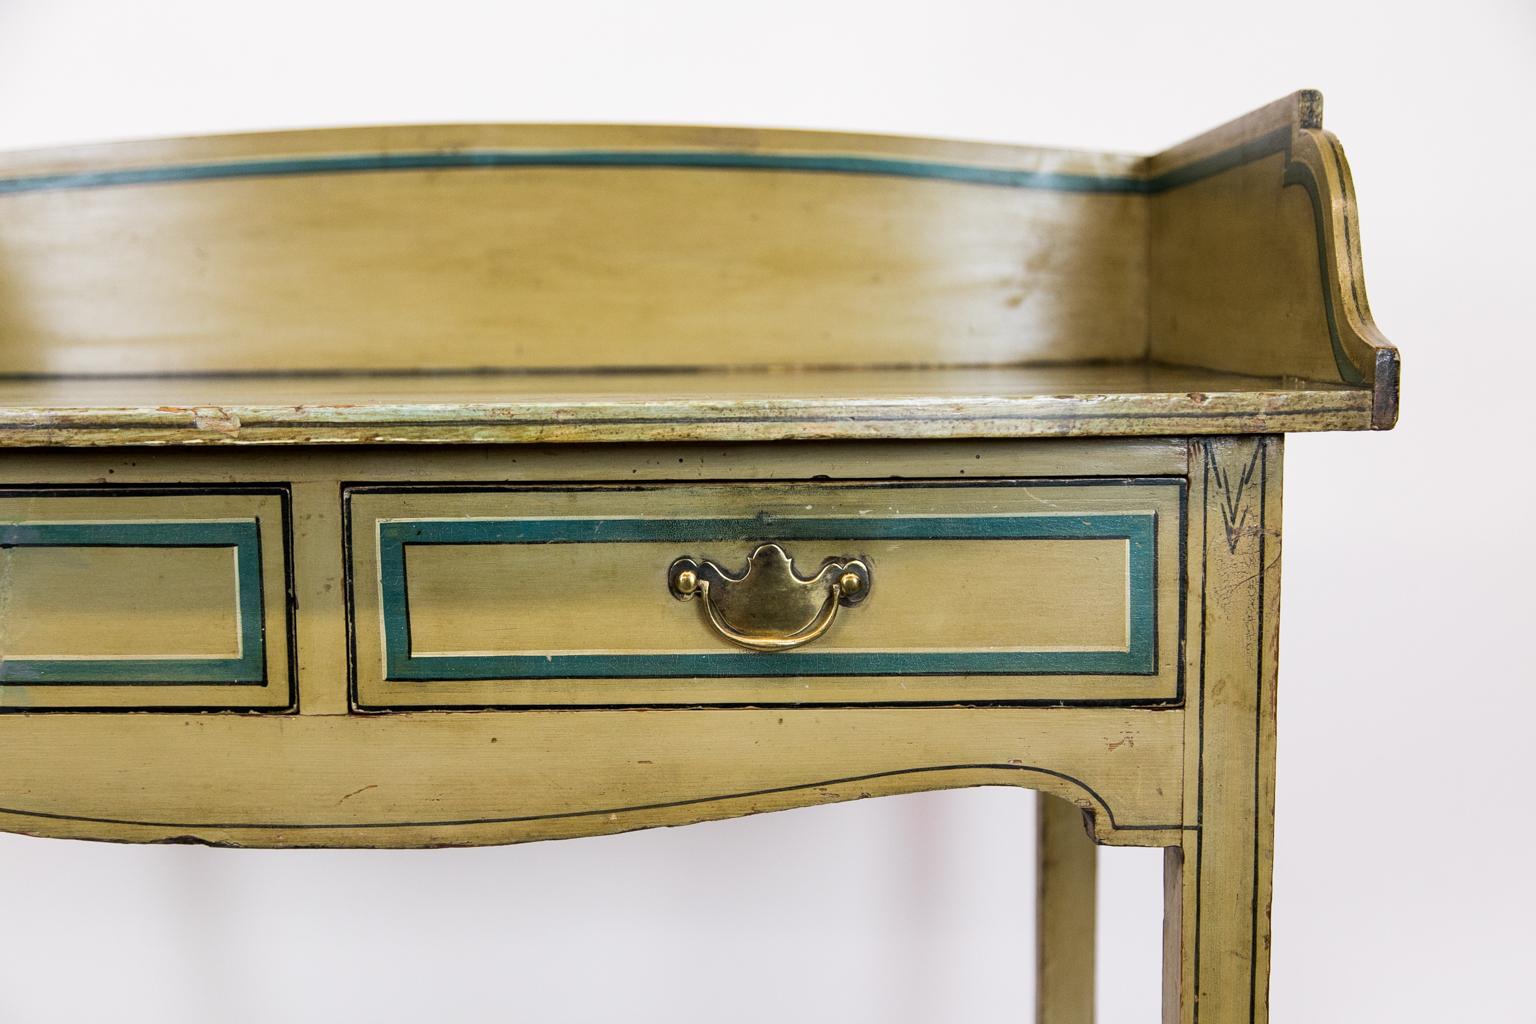 English faux painted side table with gallery has a drawer front painted to simulate crossbanding and ebony inlay. The top is simulated to look like marble.